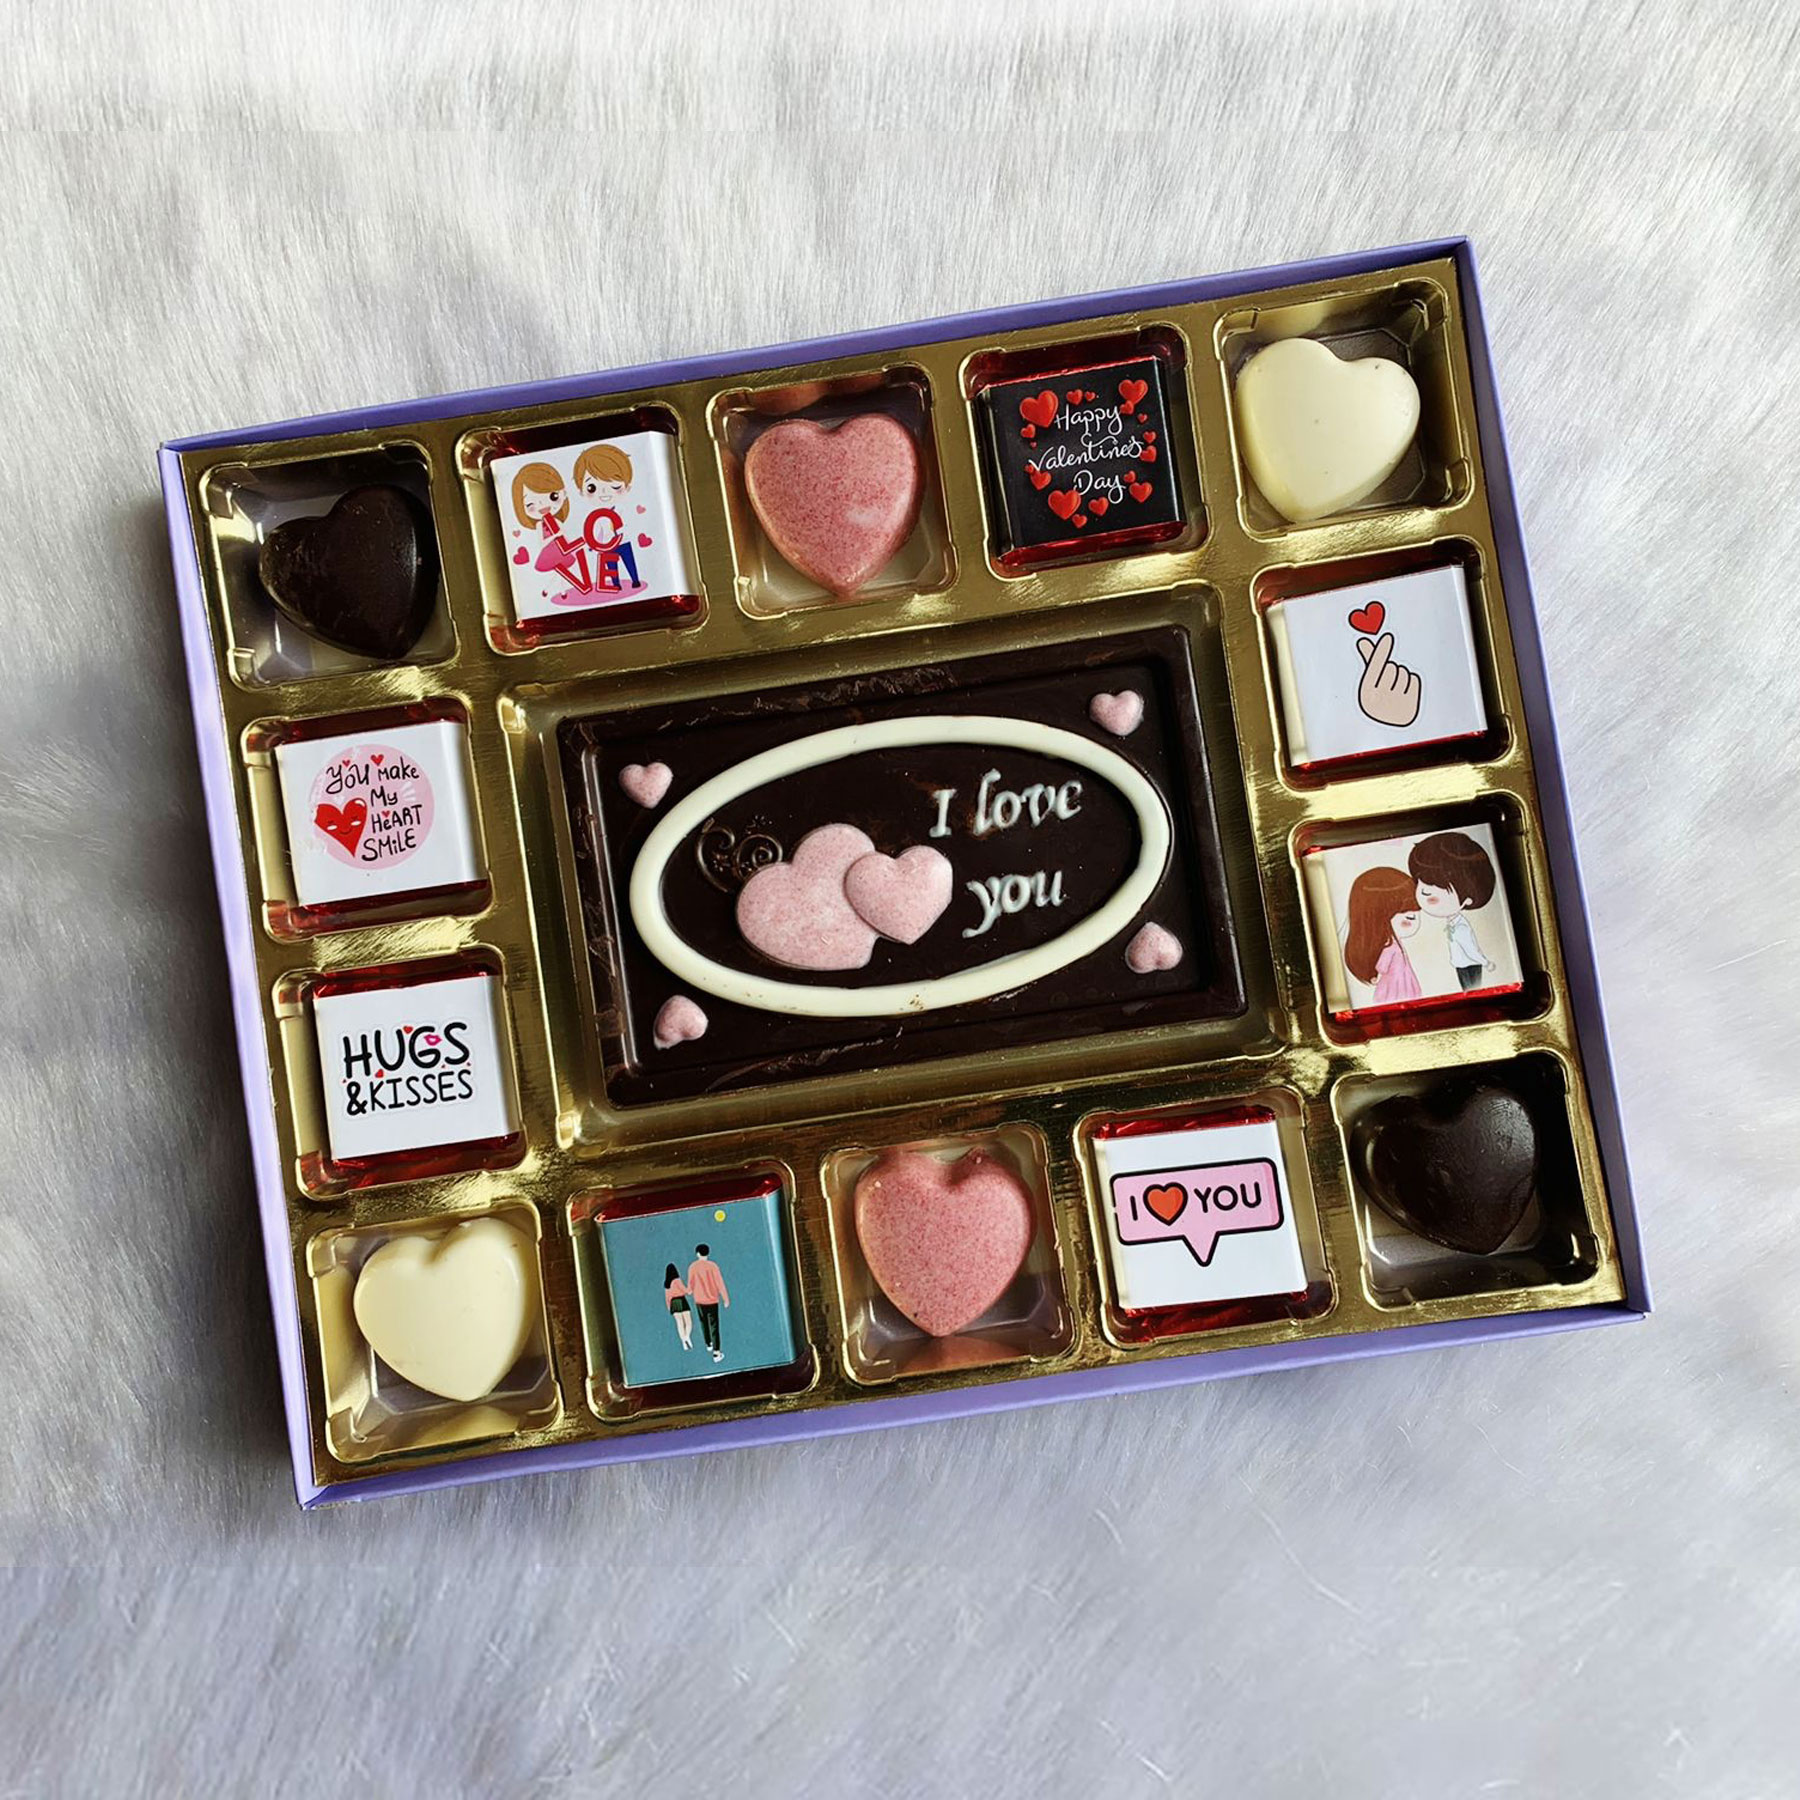 12 Chocolate Gifts for the Sweetest Valentine's Day Yet | Vogue